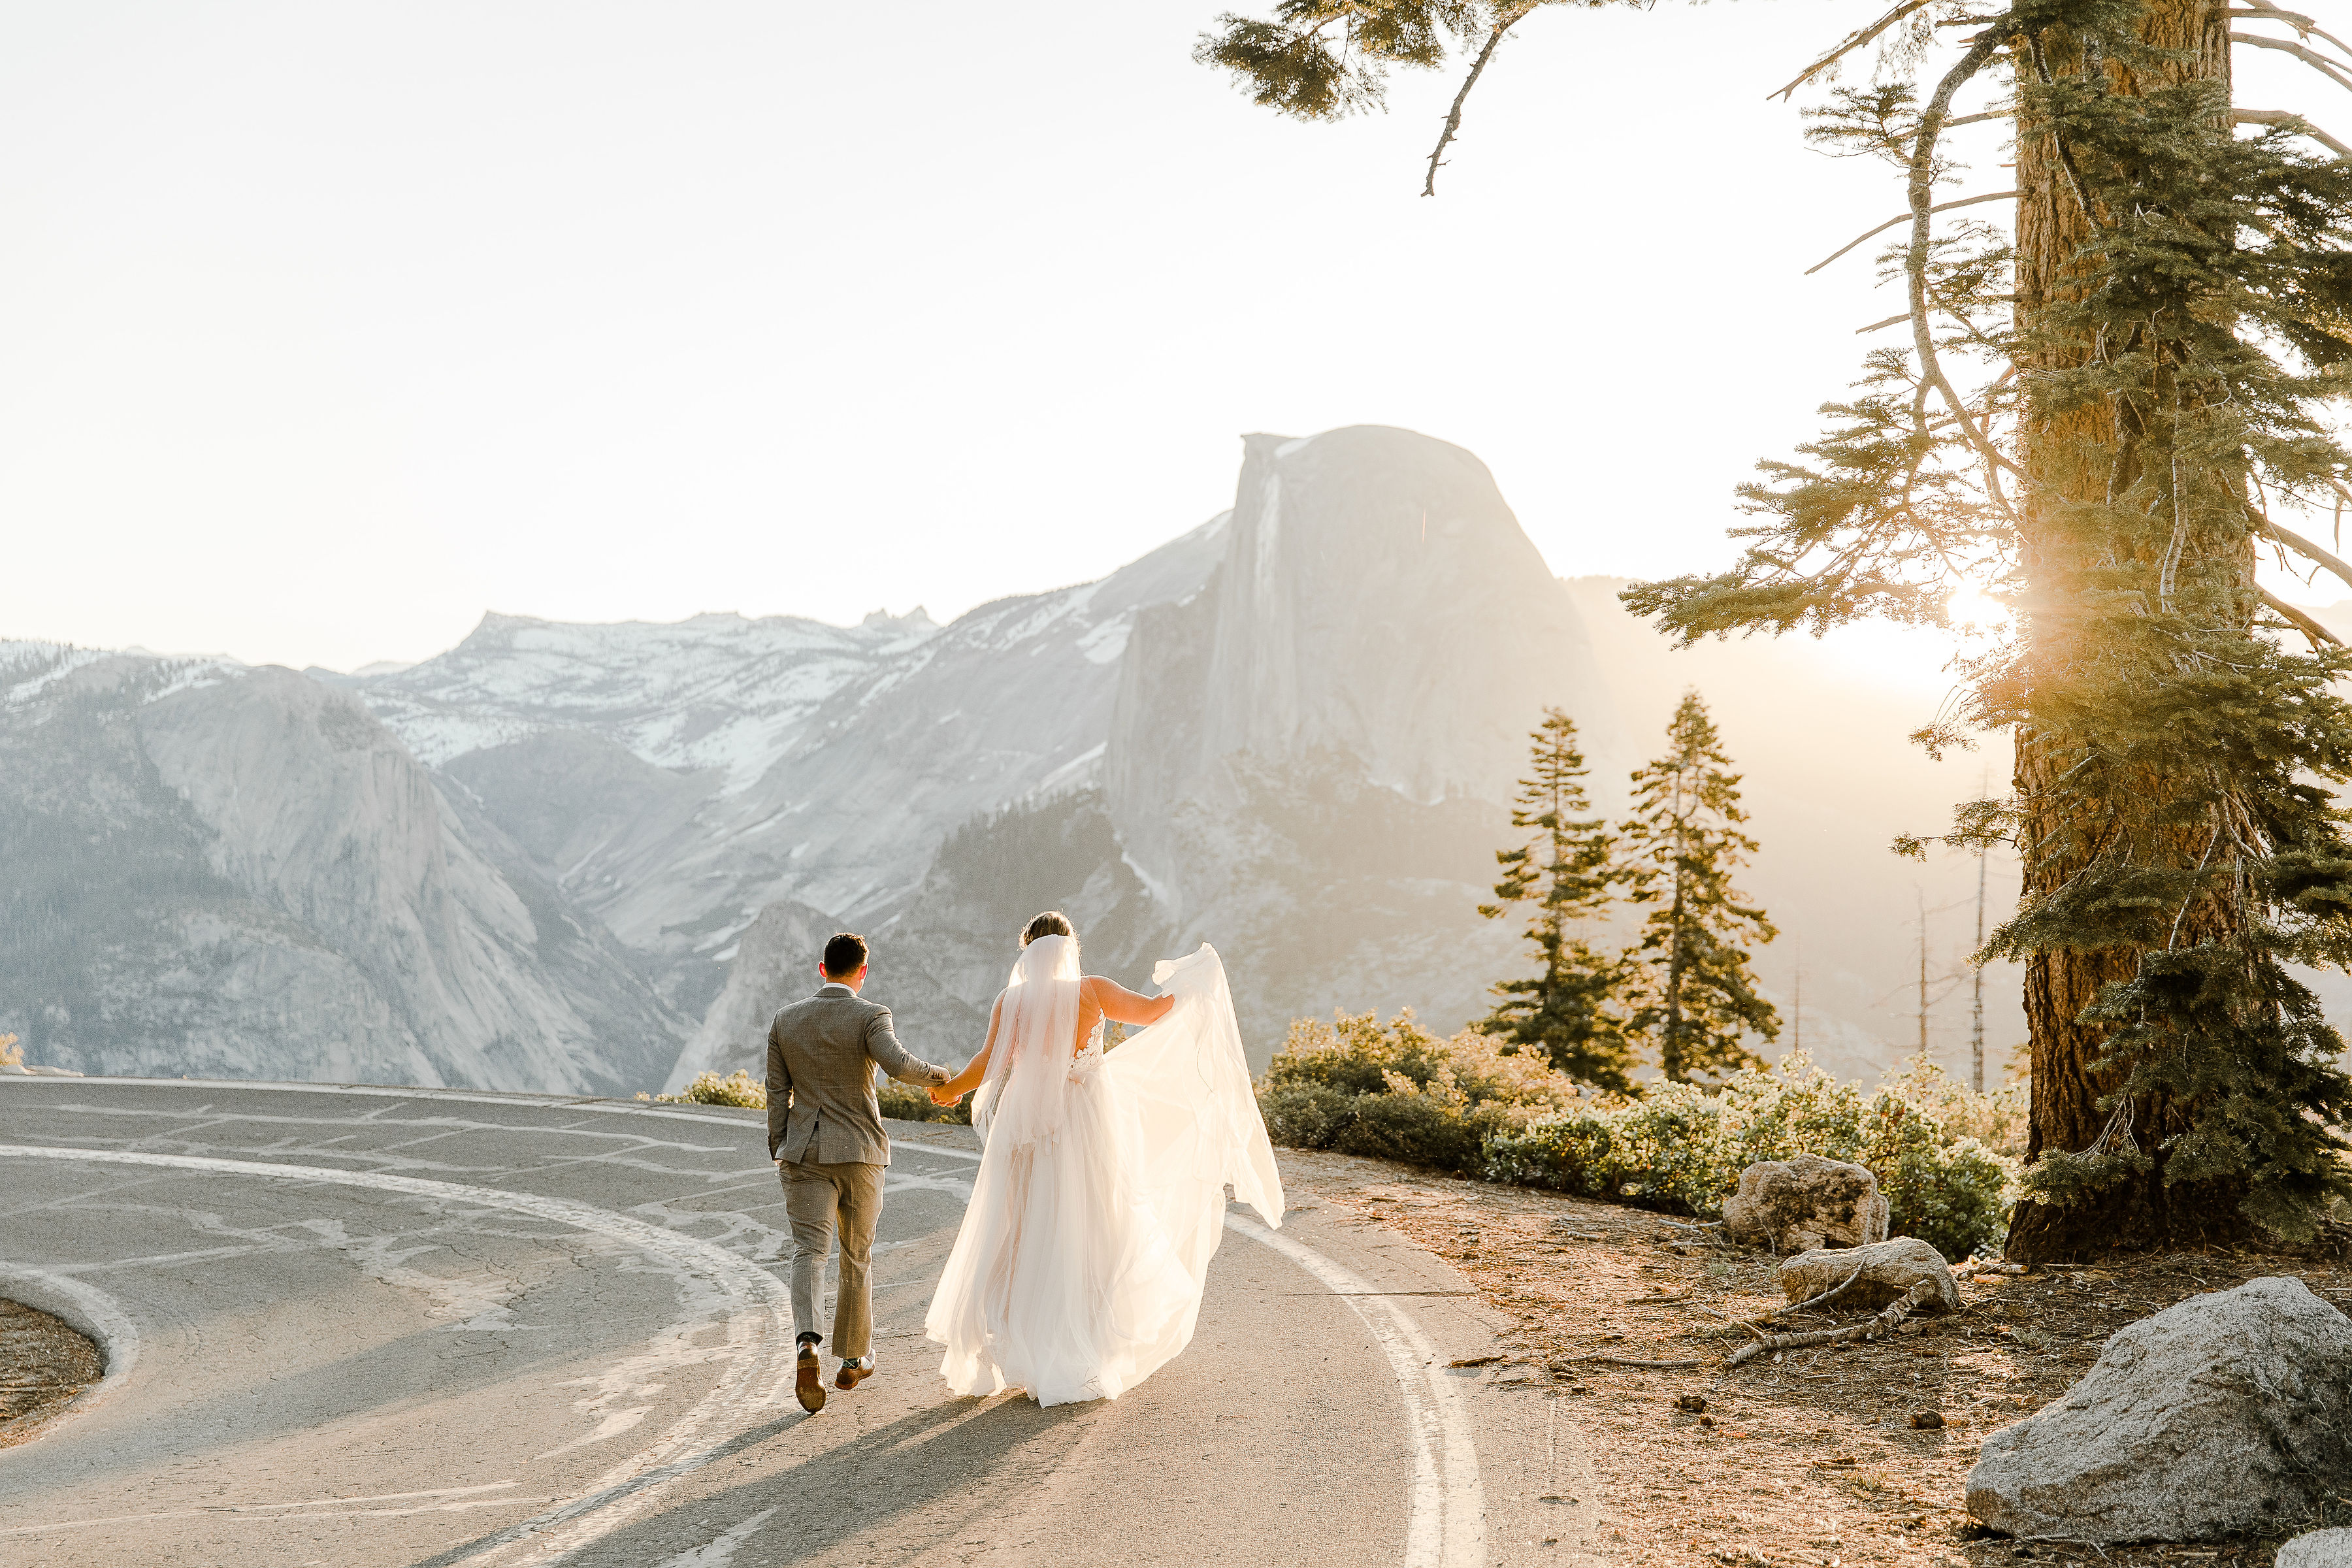 bride and groom walking on road in yosemite national park with half dome in the background